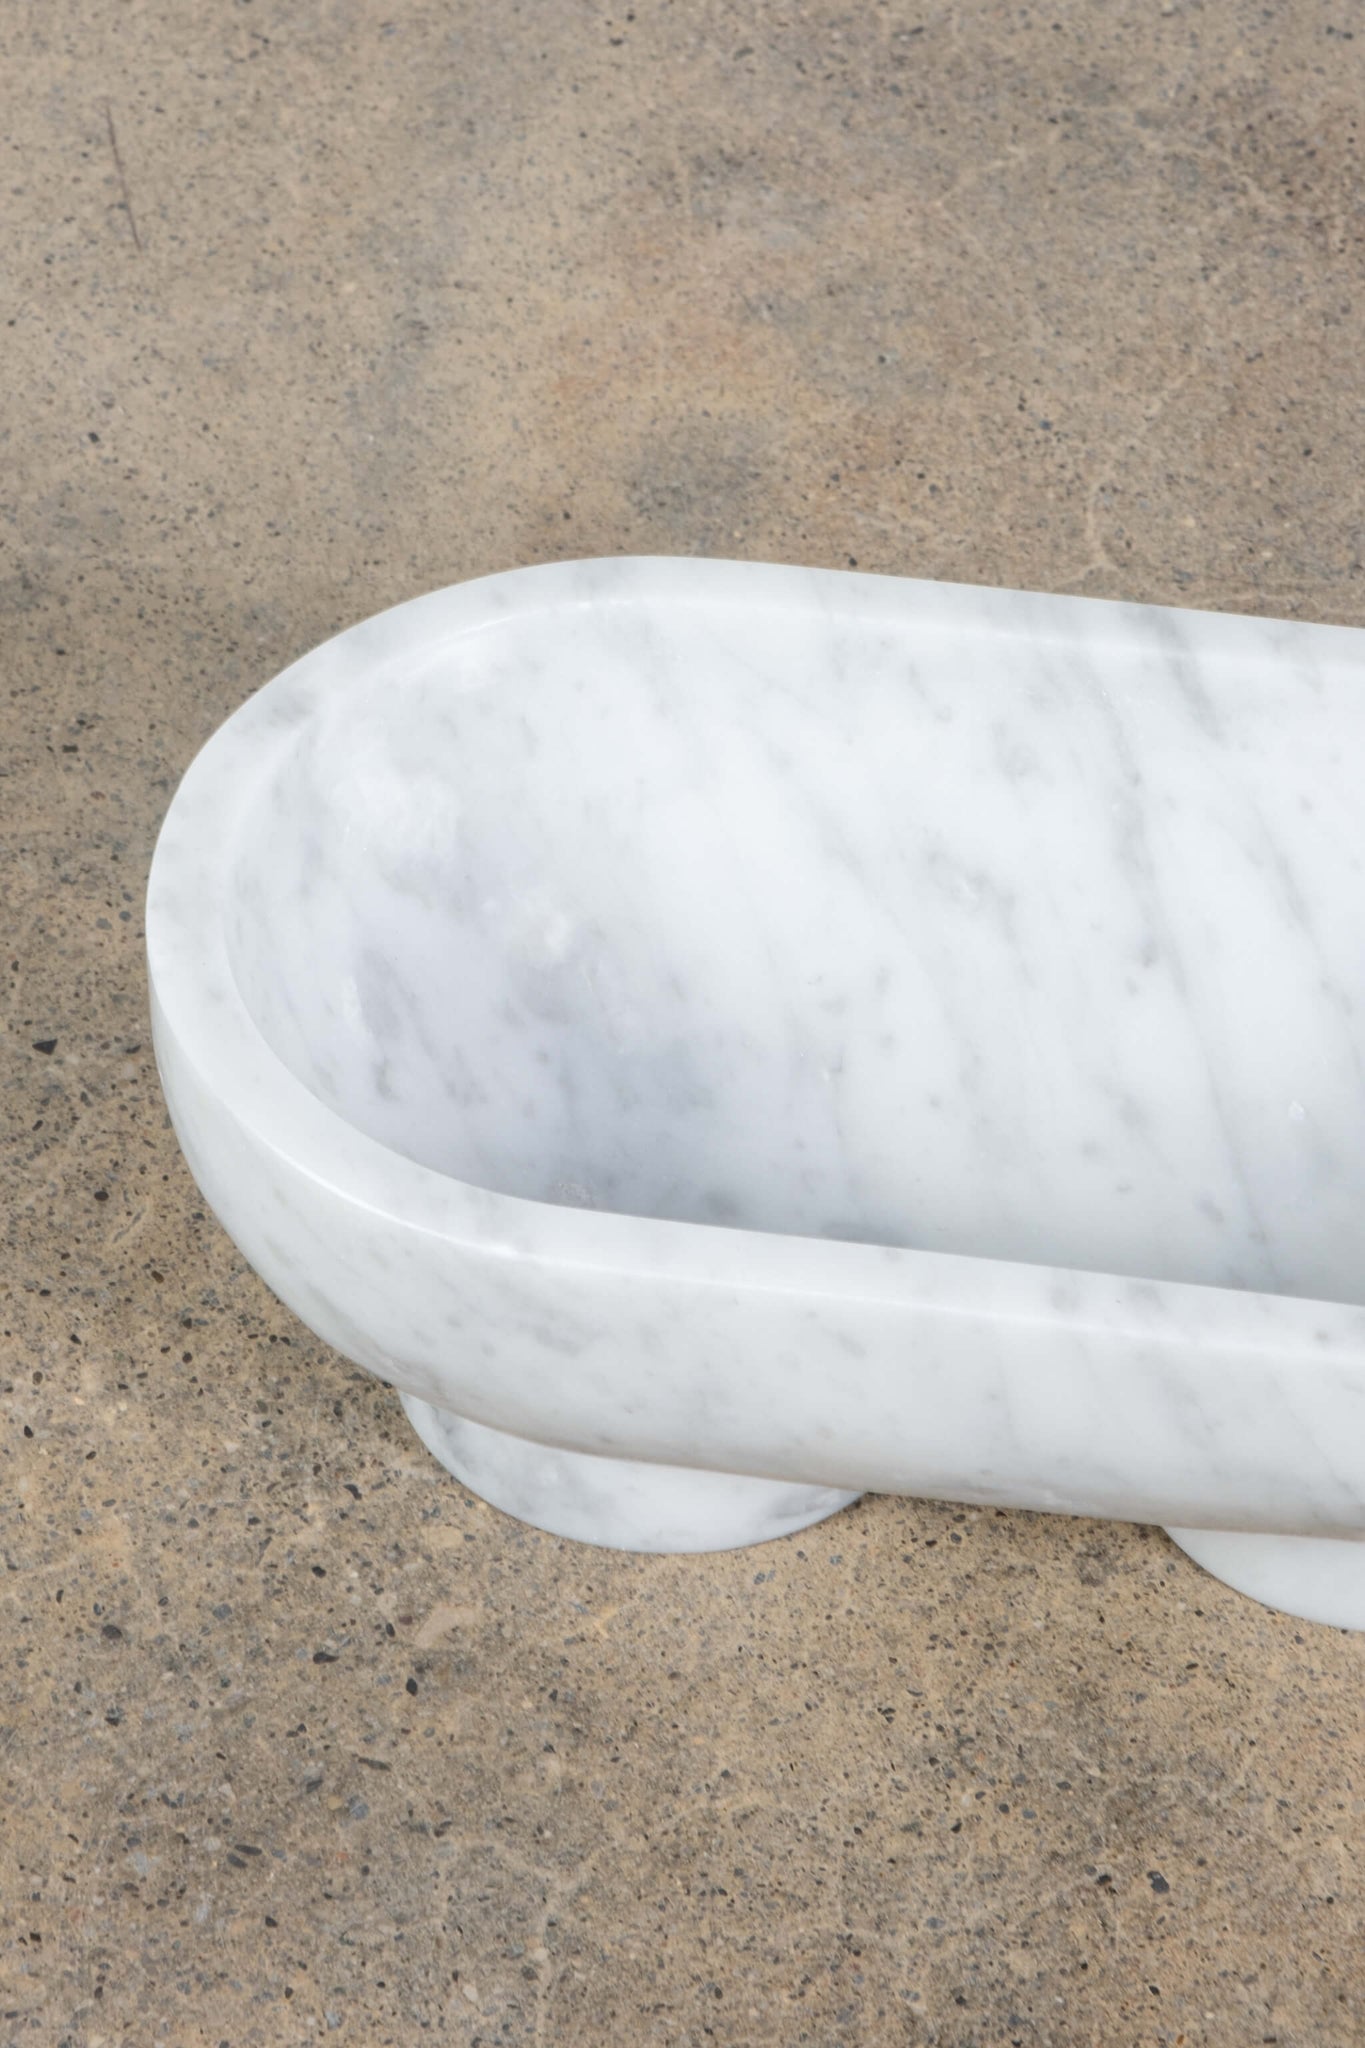 Footed Oval Bowl in White Marble, close up